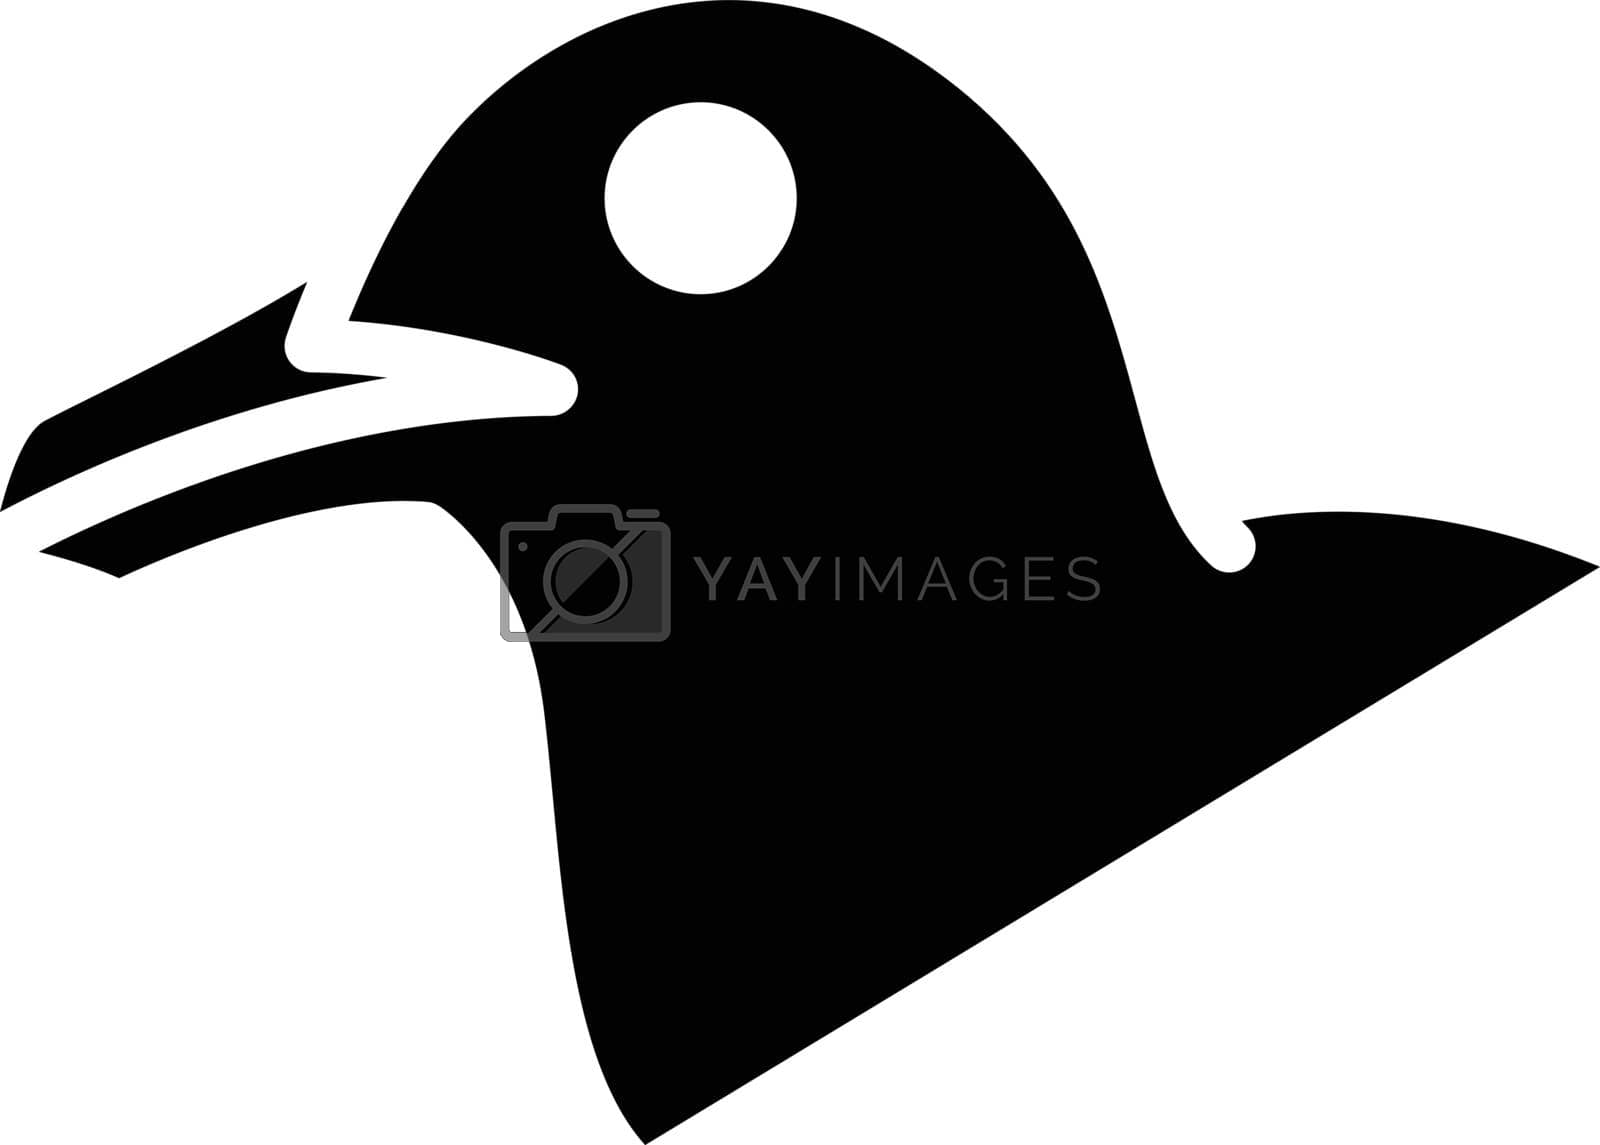 Royalty free image of bird by vectorstall